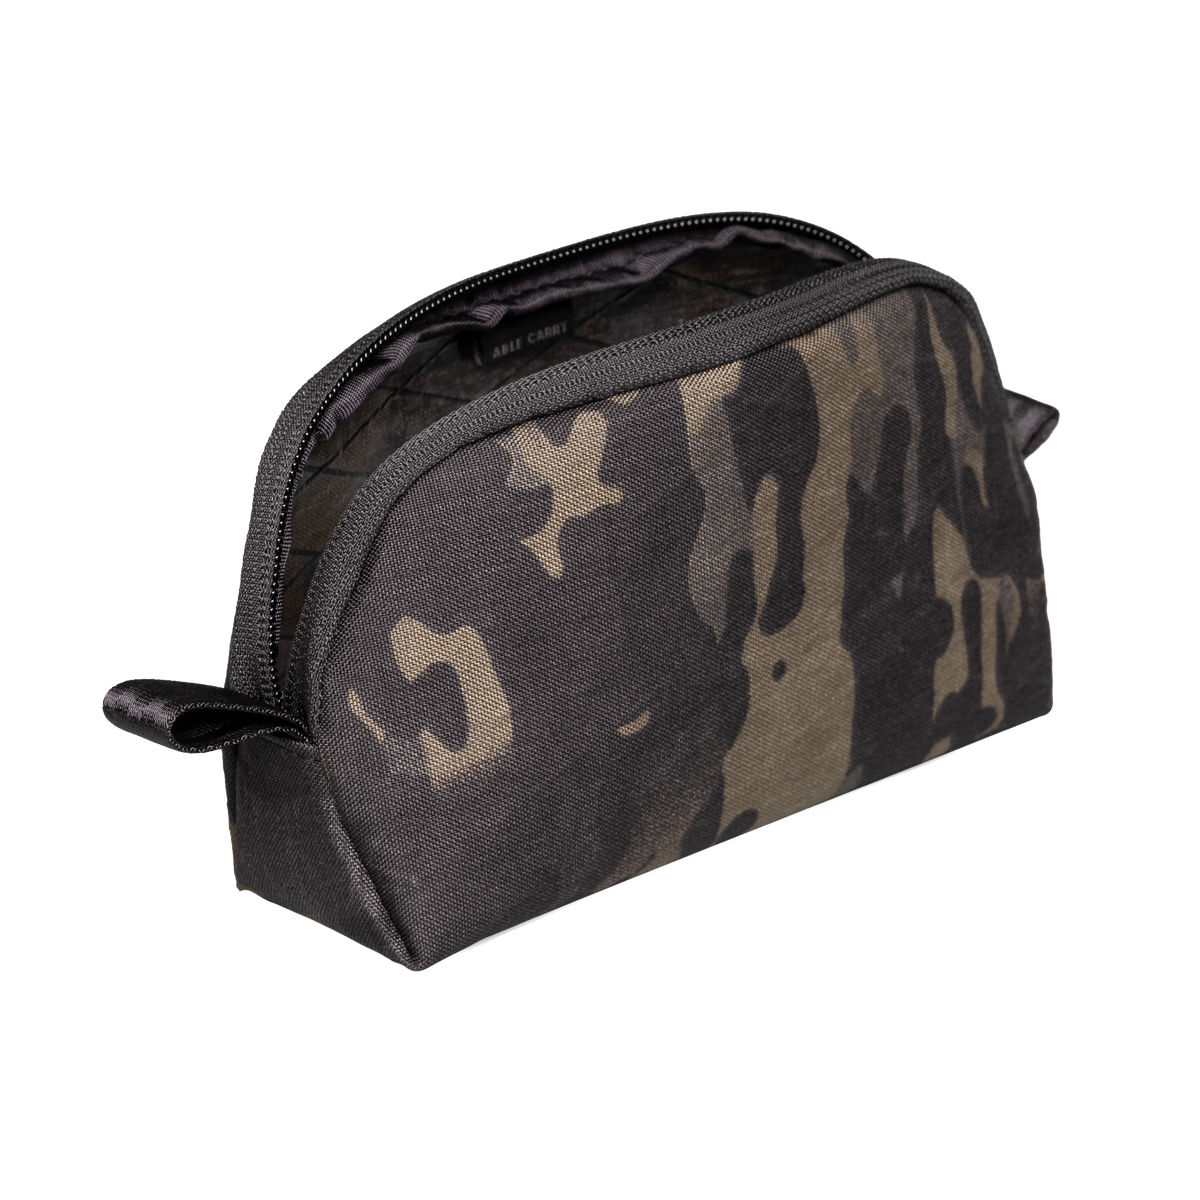 Stash Pouch by Able Carry - Storming Gravity